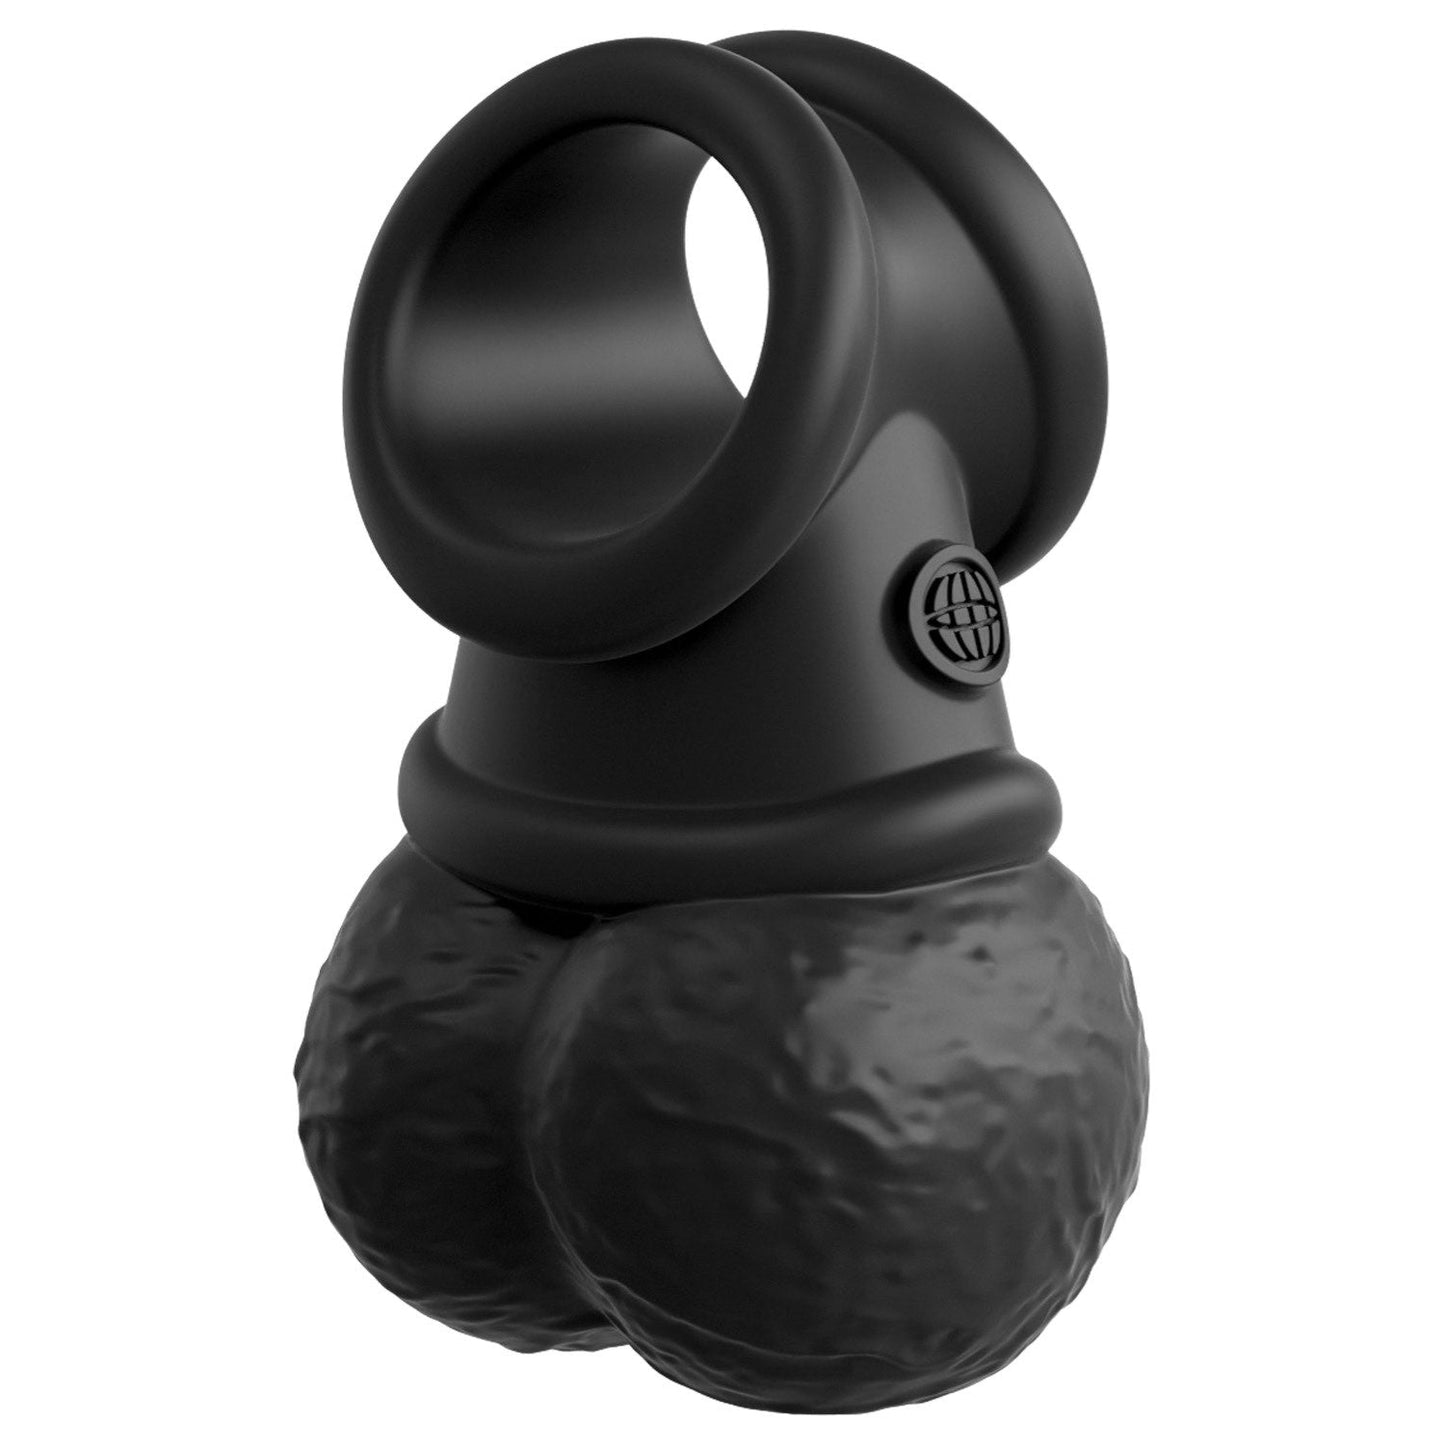 Elite Ultimate Vibrating Silicone Body Dock Kit - Body Dock Strap-On Harness with 17.8 cm Vibrating Dong & Vibrating Balls